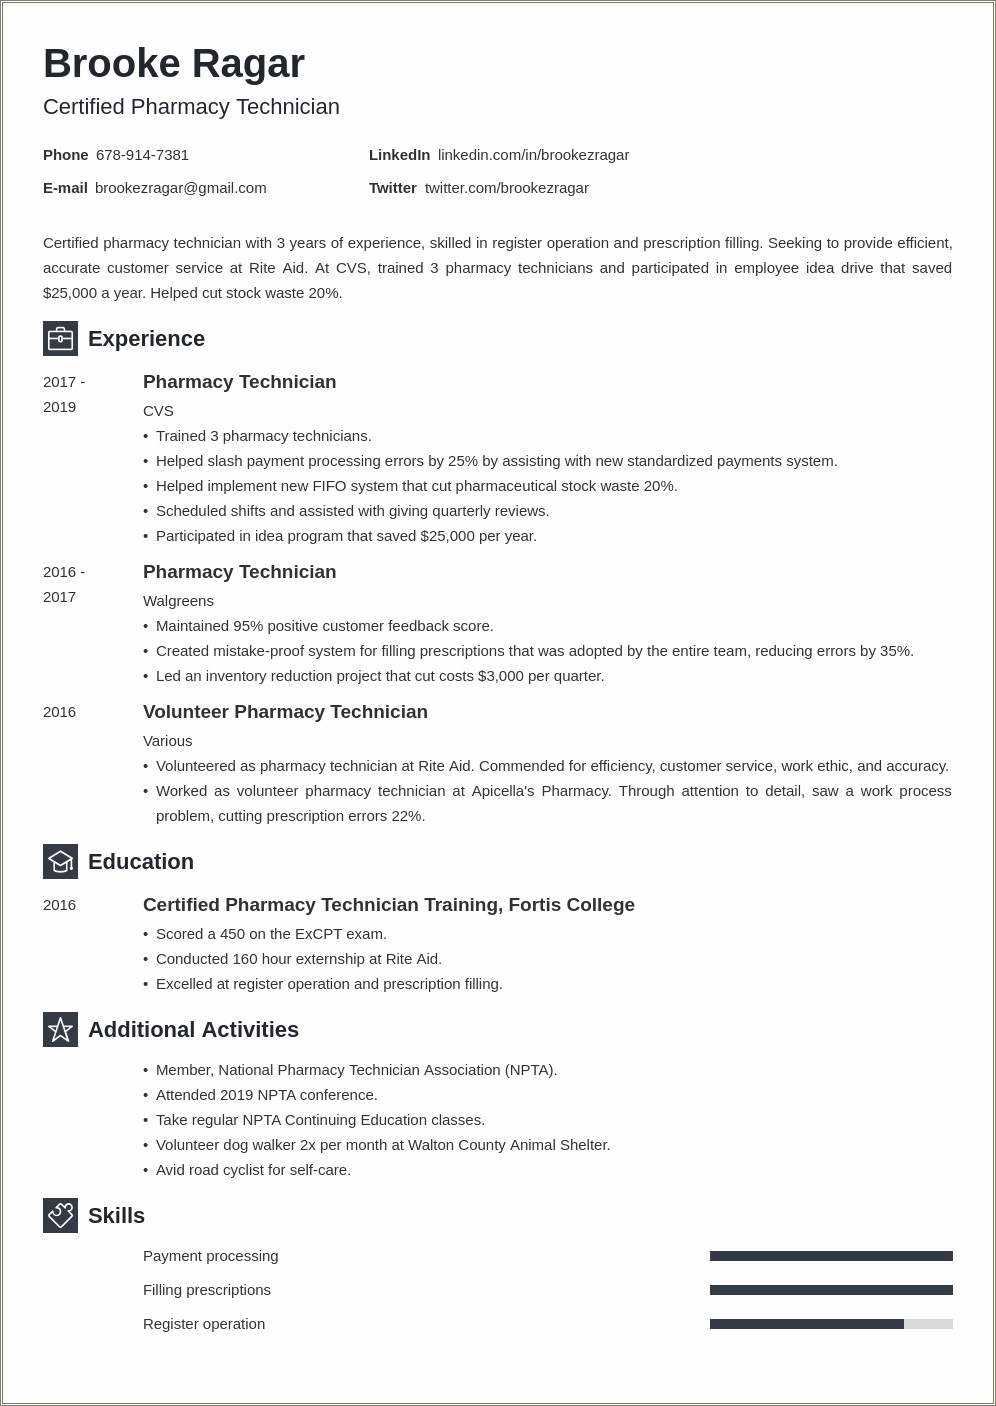 An Example Of A Resume For Technician